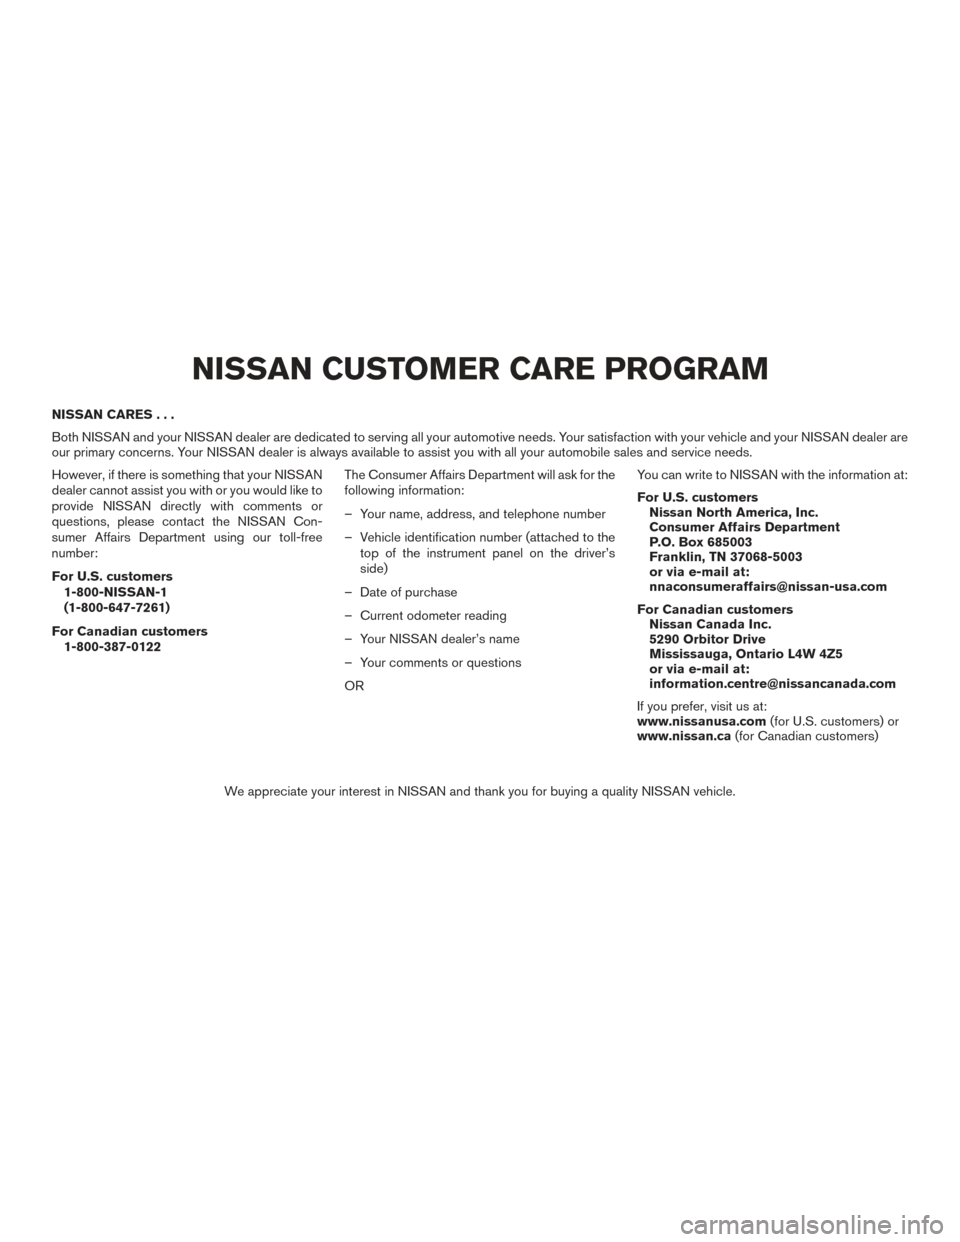 NISSAN TITAN 2017 2.G Owners Manual NISSAN CARES...
Both NISSAN and your NISSAN dealer are dedicated to serving all your automotive needs. Your satisfaction with your vehicle and your NISSAN dealer are
our primary concerns. Your NISSAN 